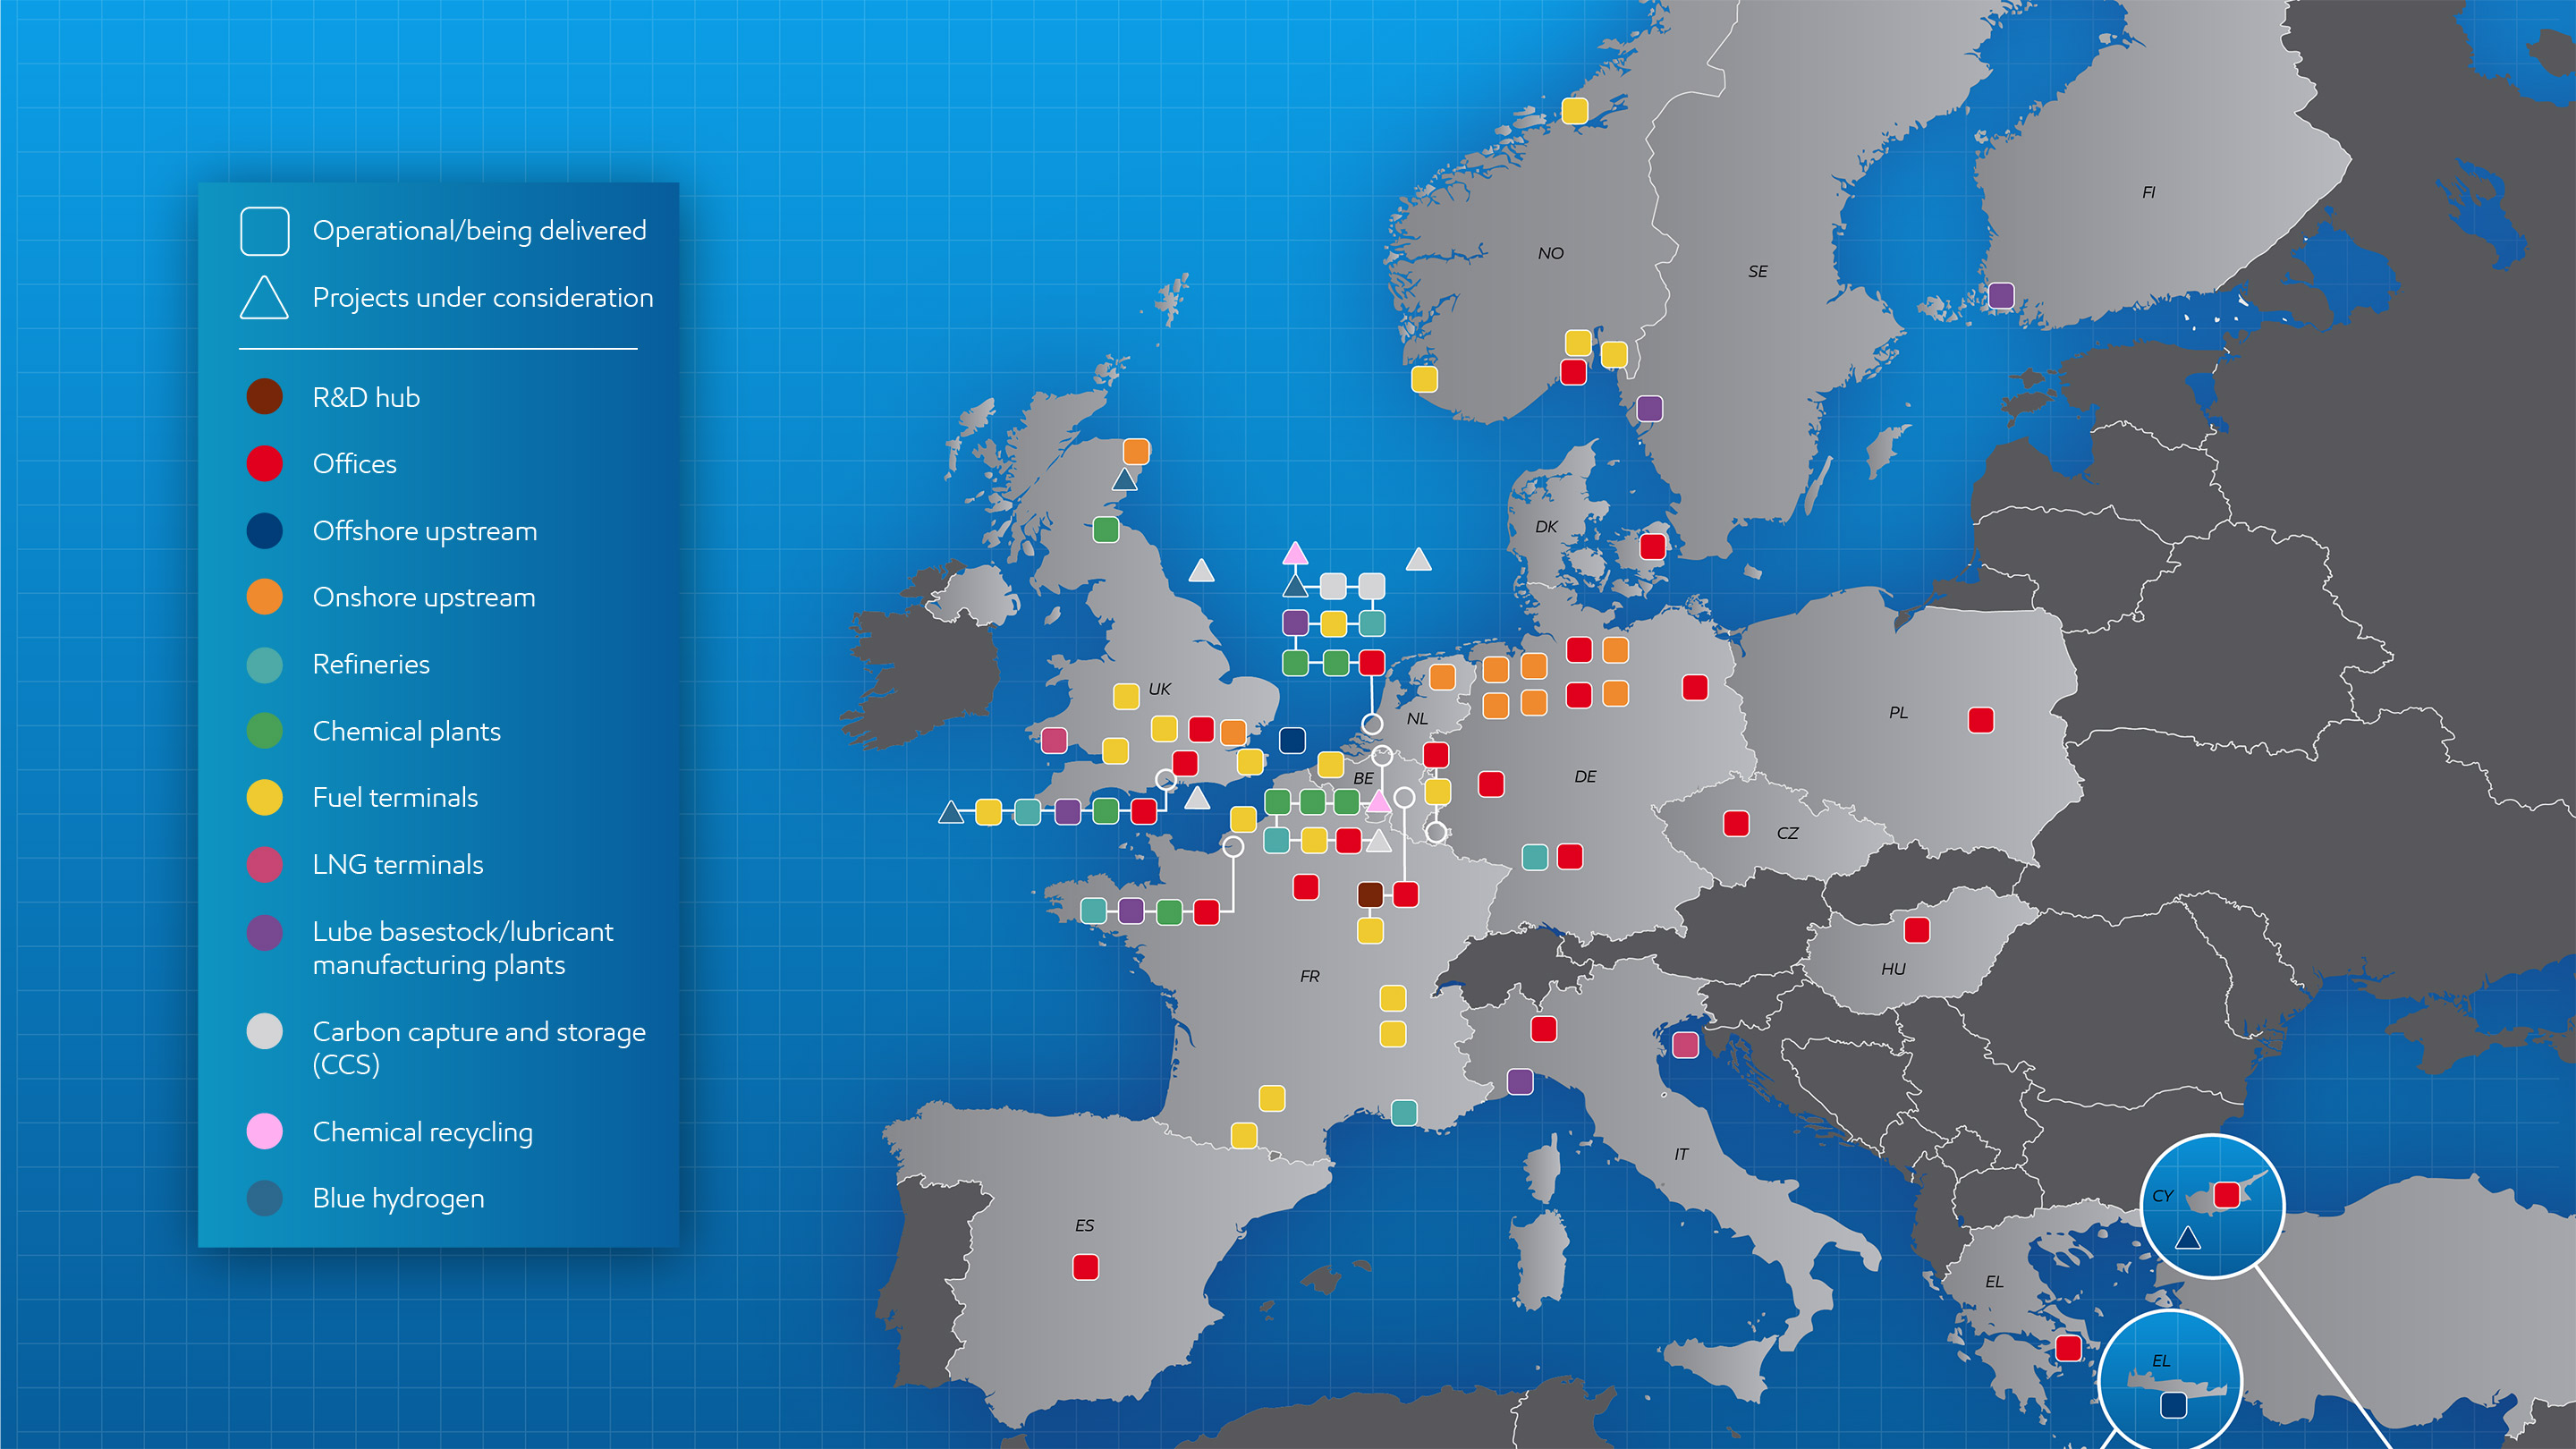 map depicting various types of business operations in the European region